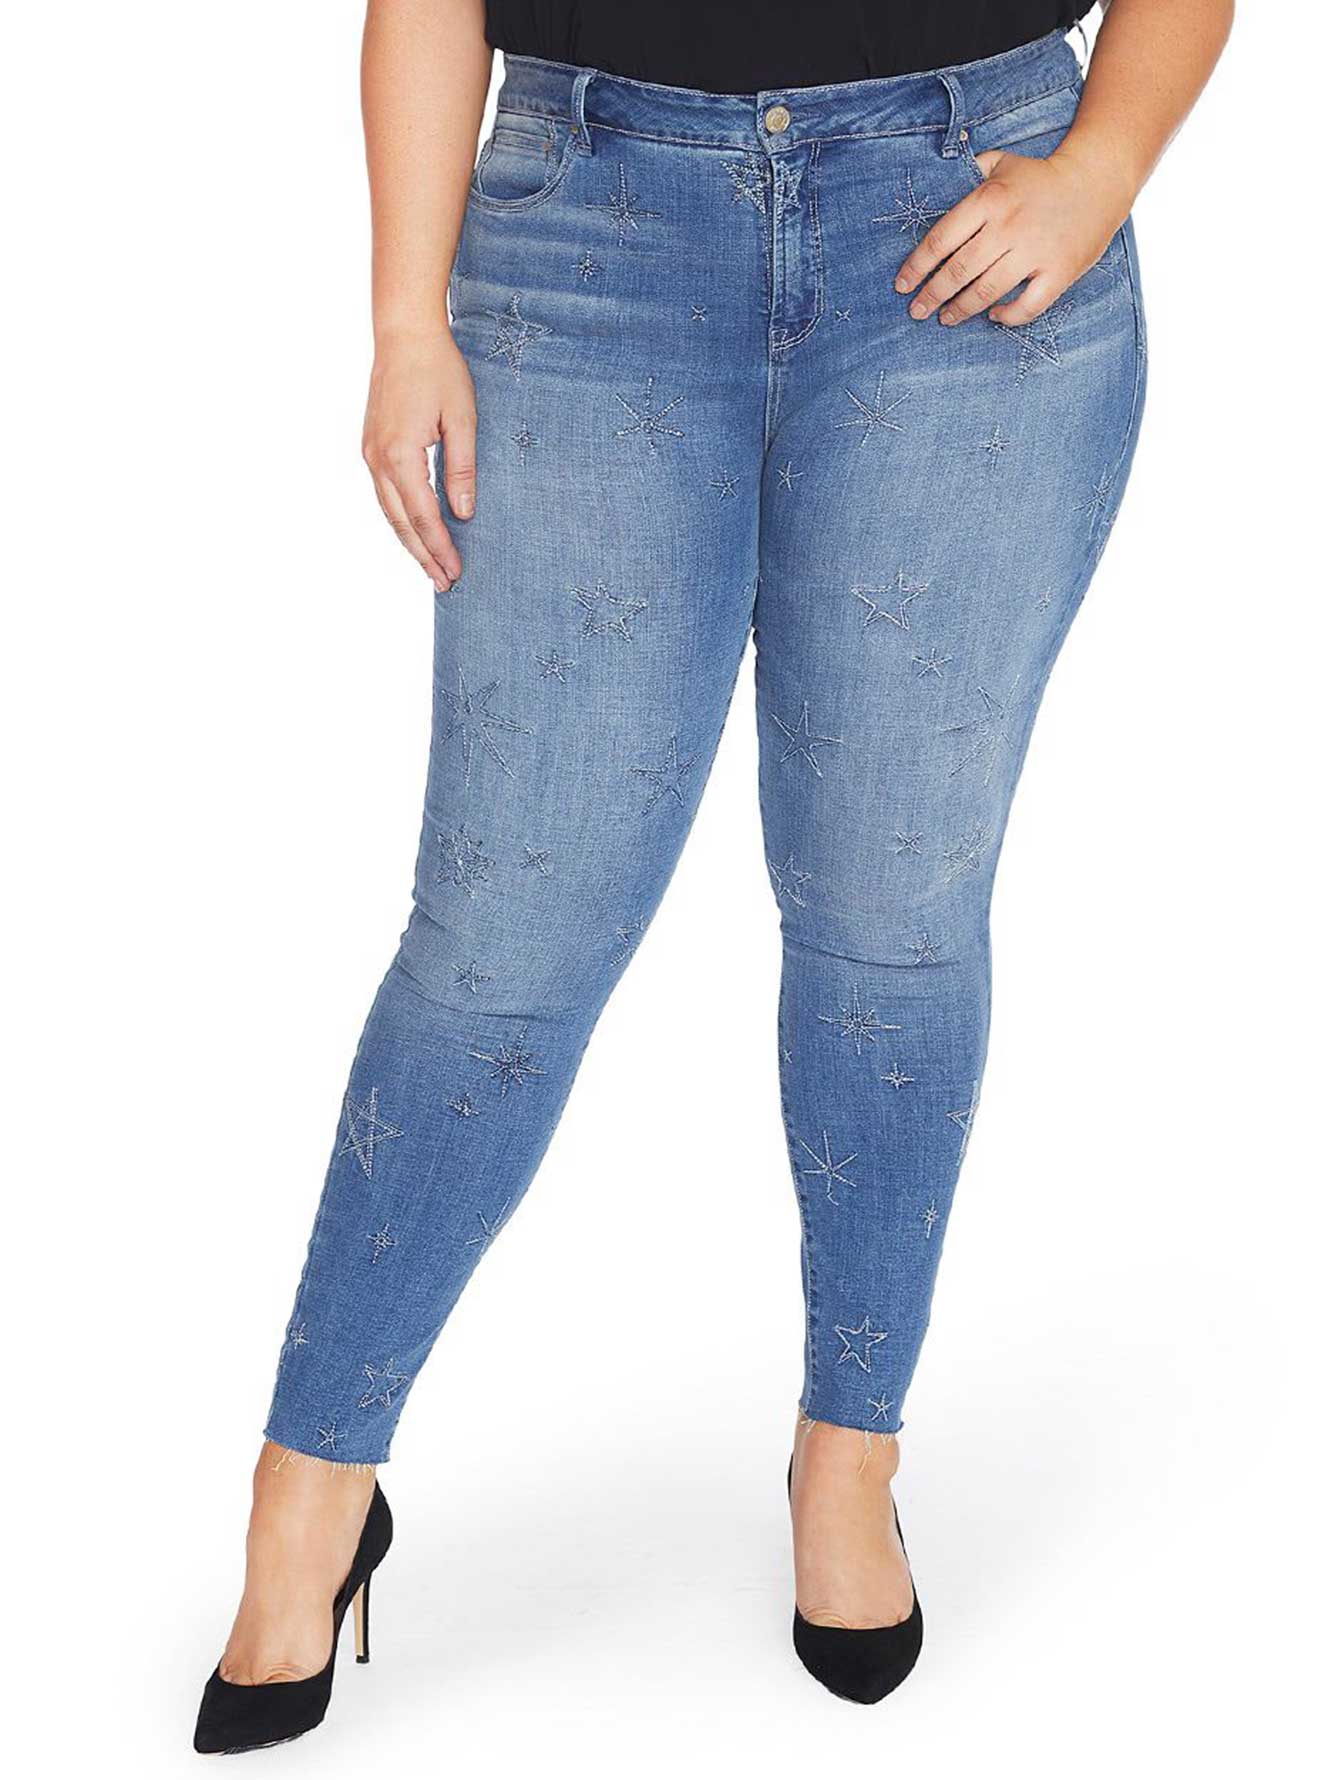 Rebel Wilson Super Skinny Jean with Embroidered Stars | Addition Elle